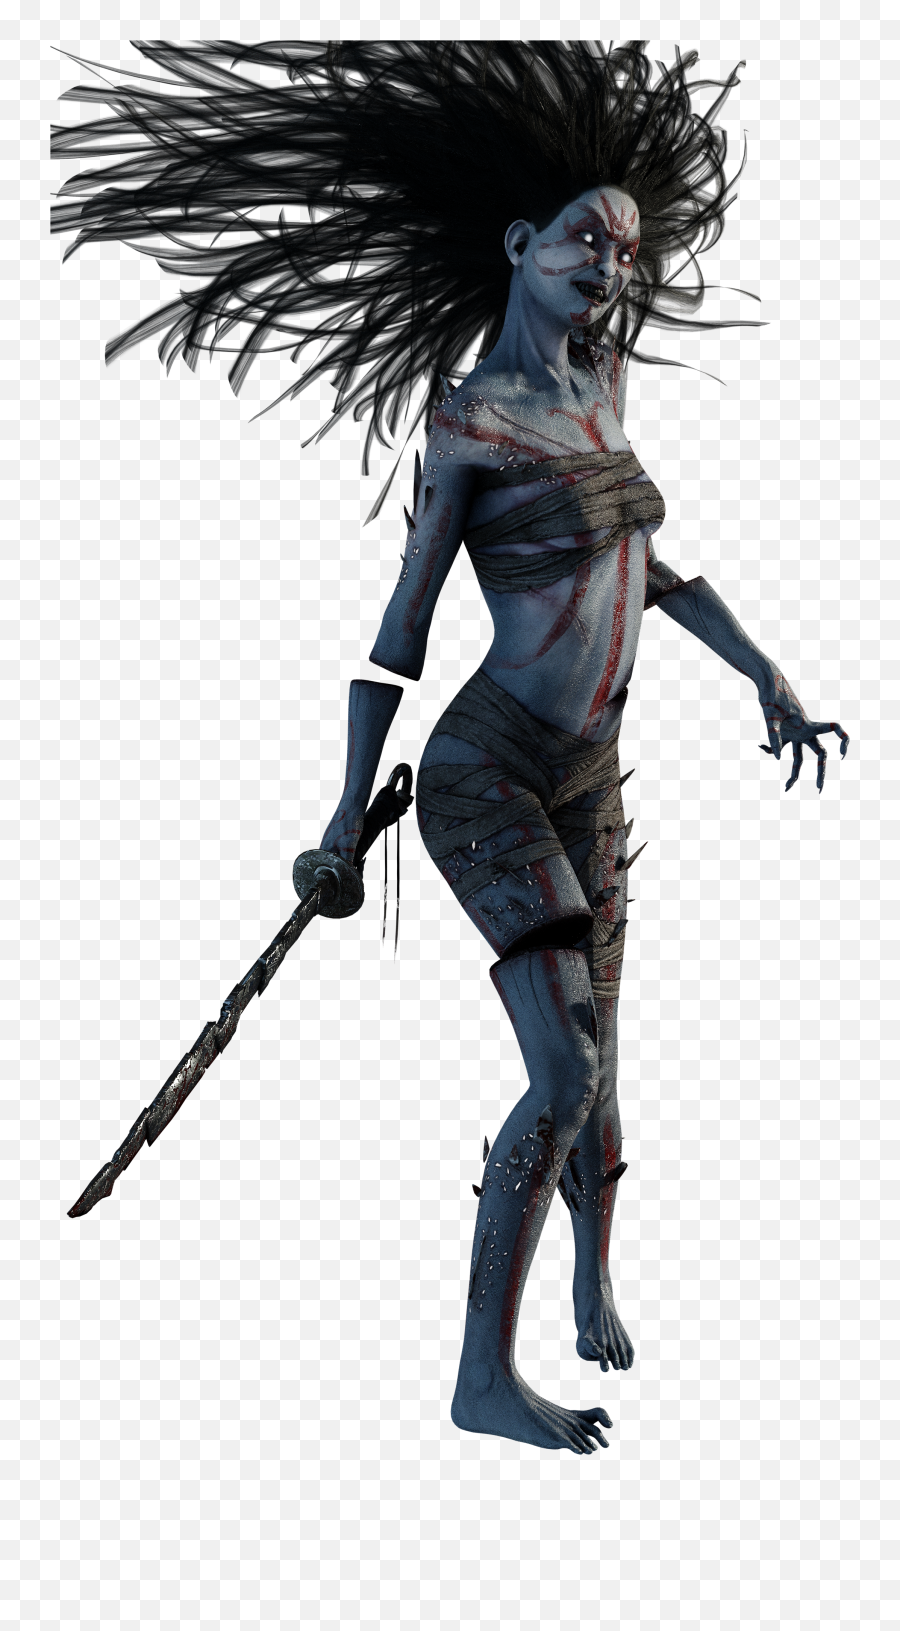 Spirit - Dead By Daylight Png,Dead By Daylight Png